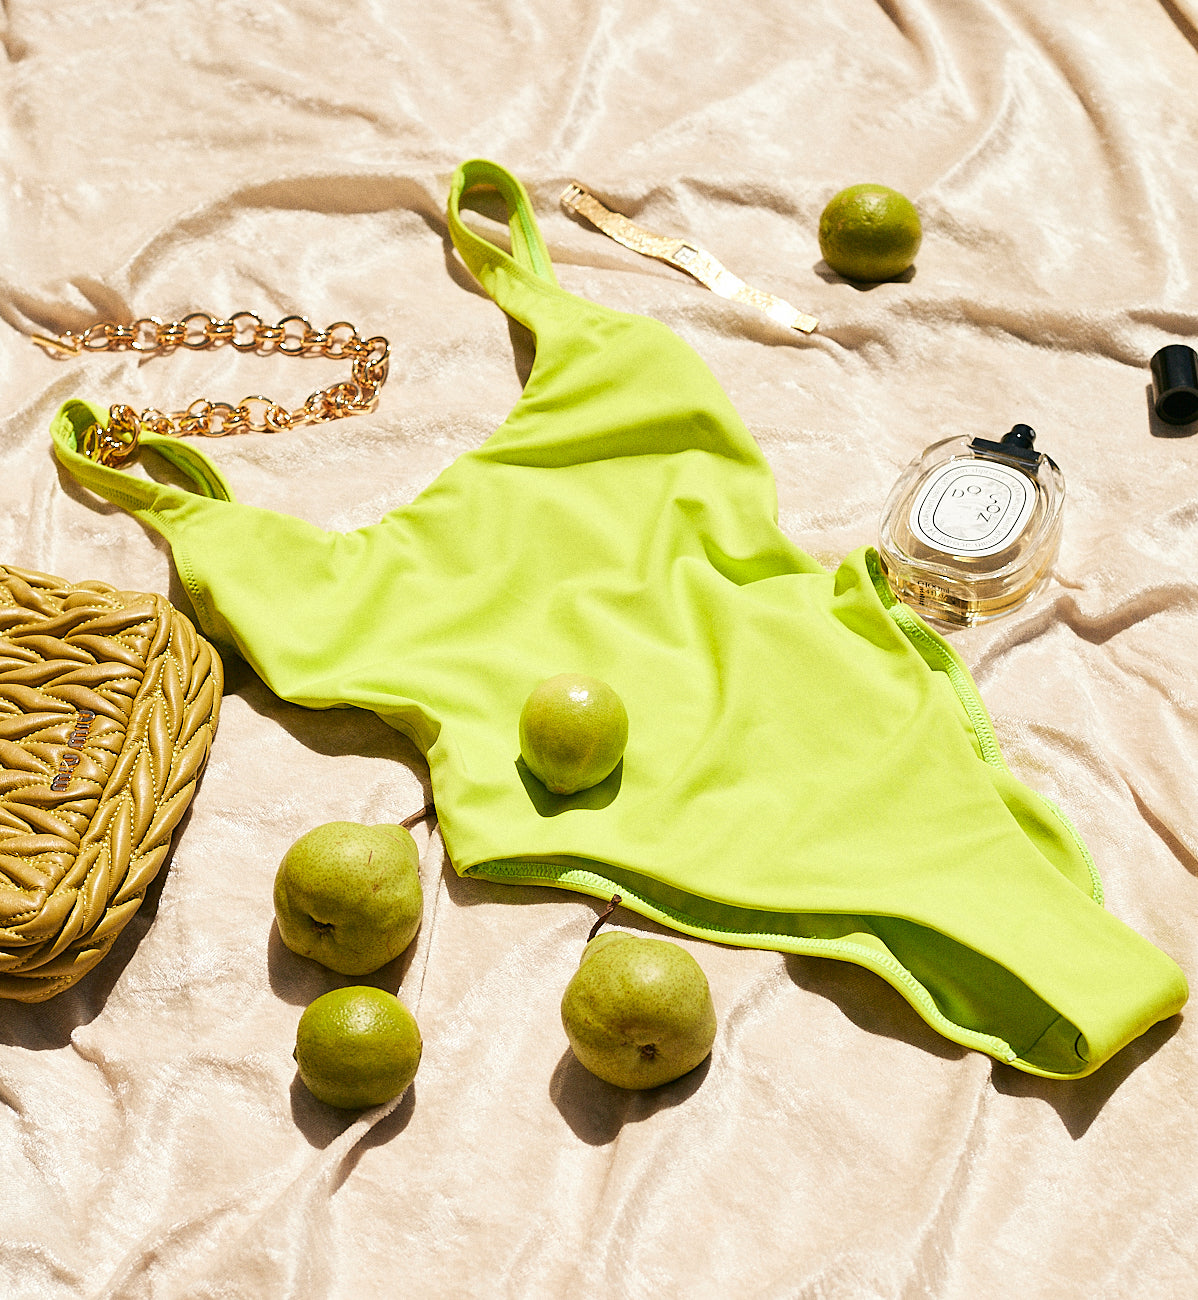 Aster swimsuit in Lime